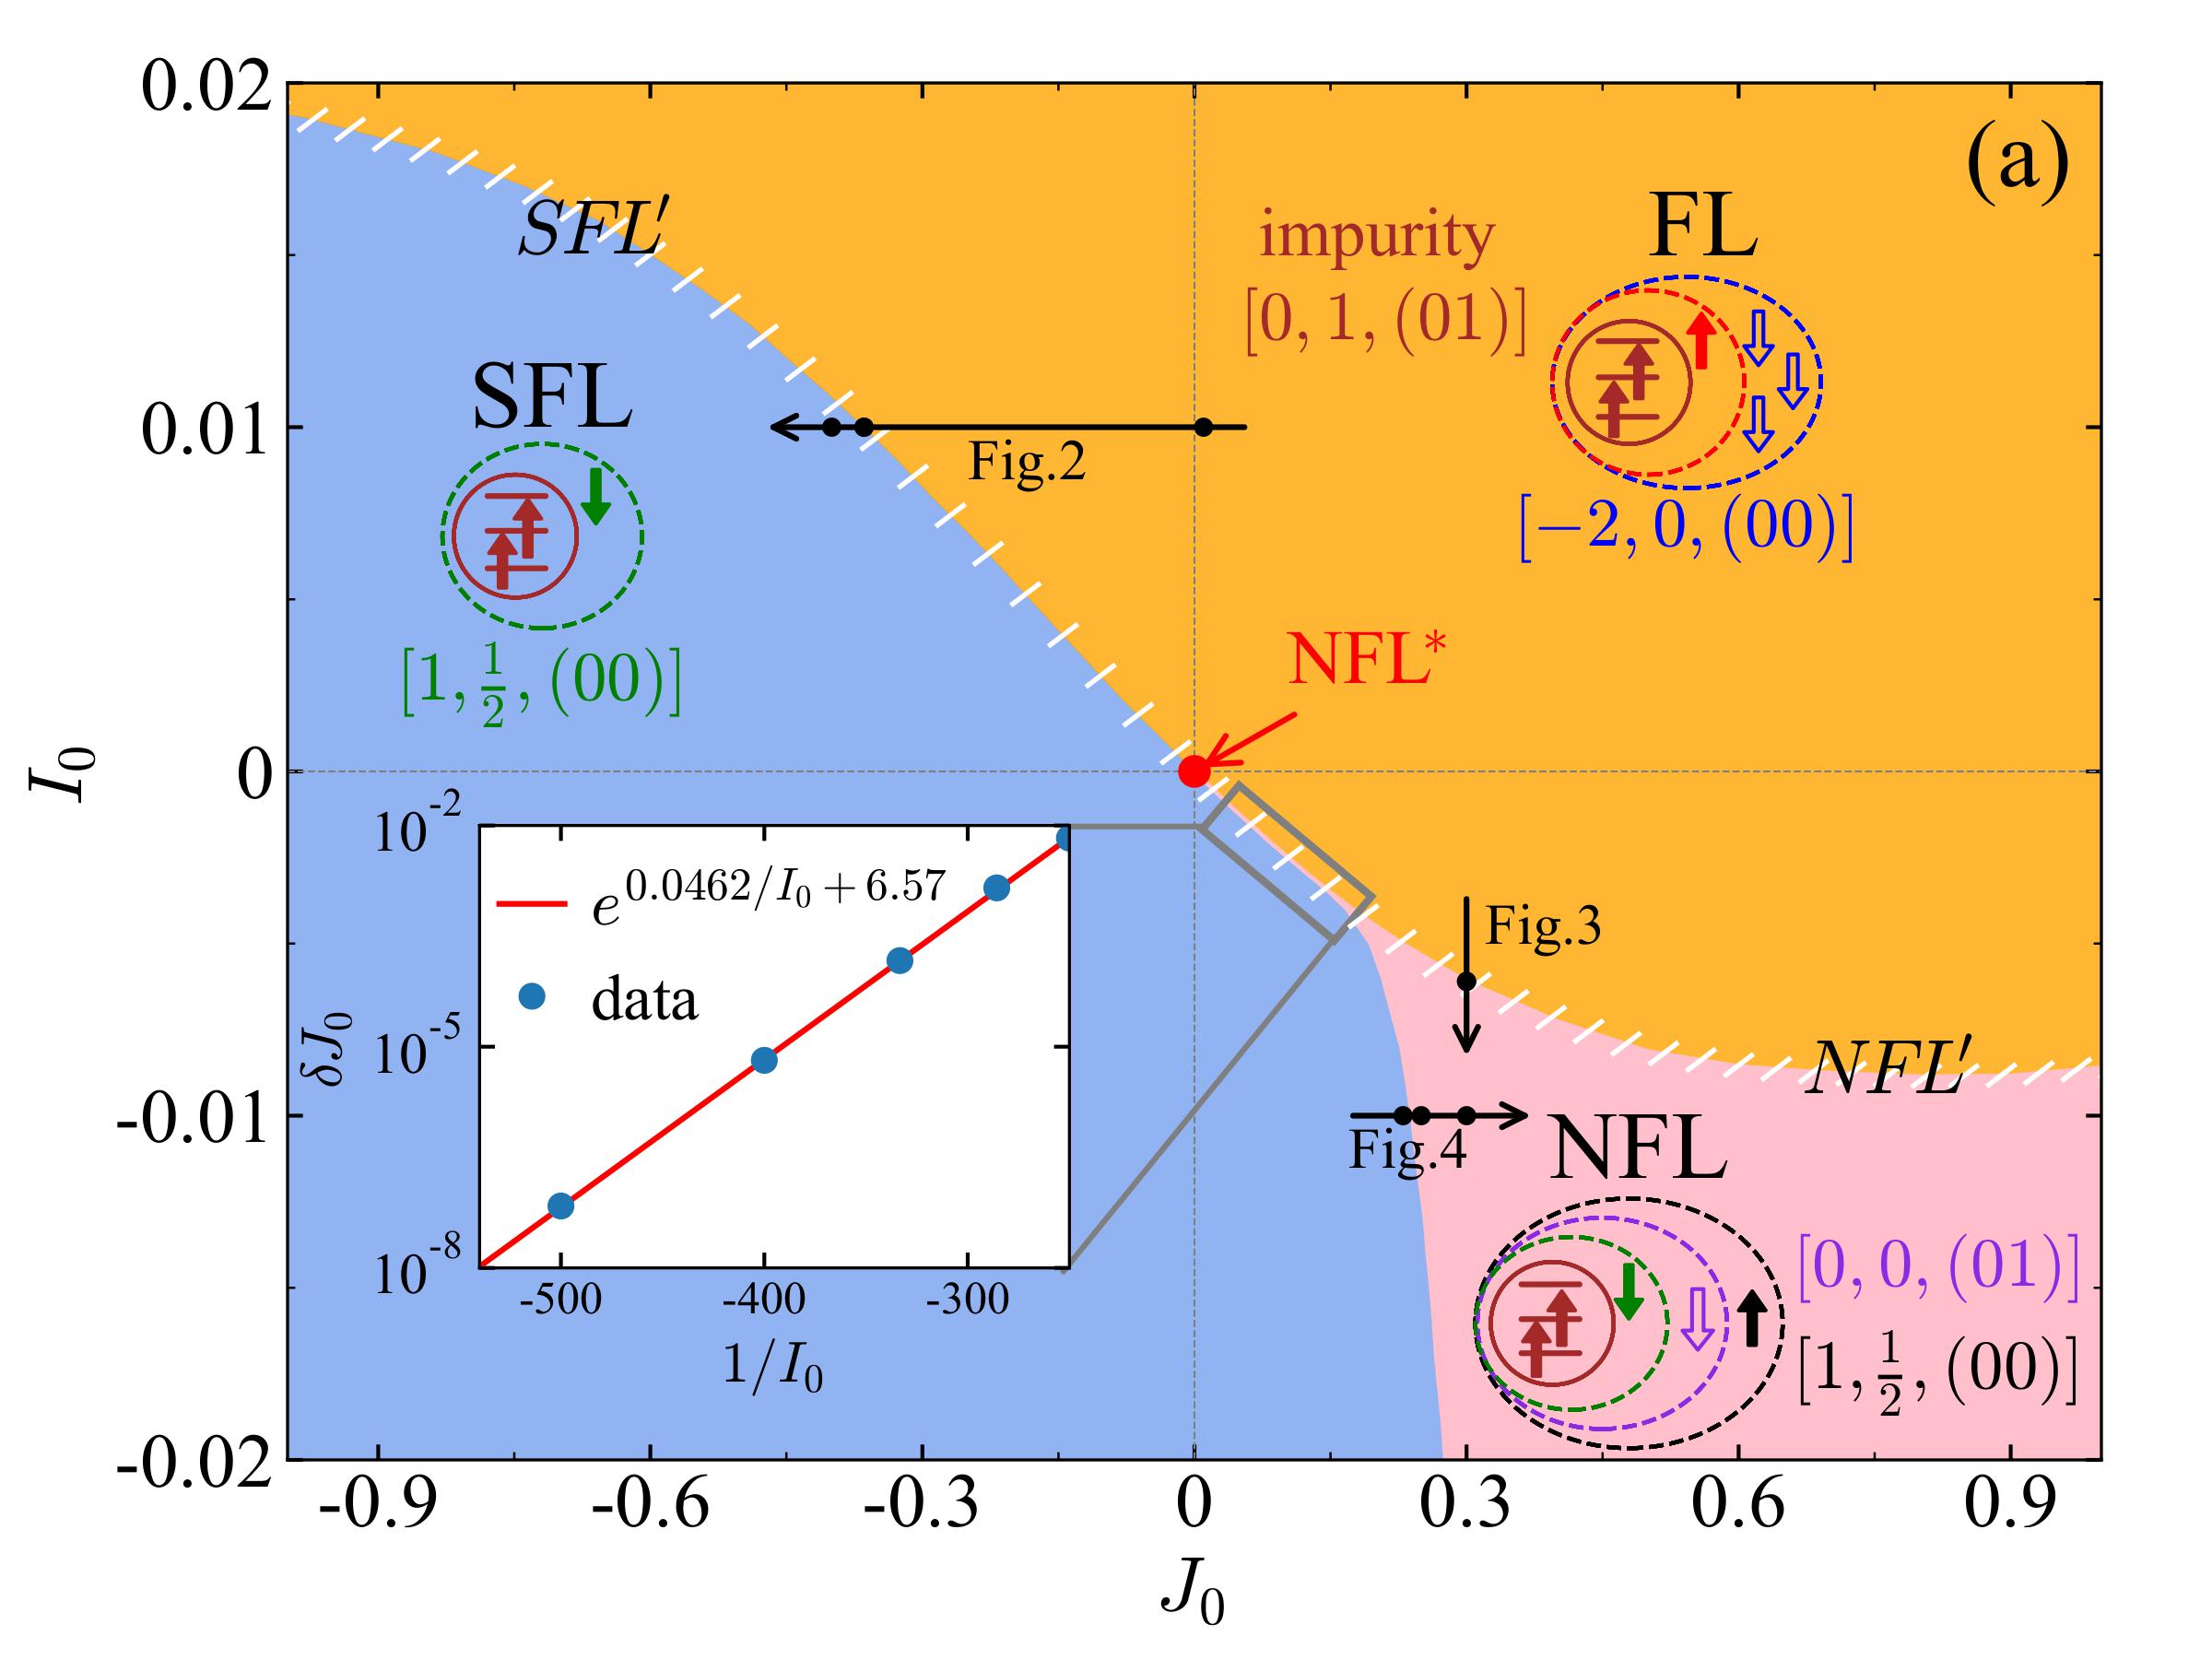 Global Phase Diagram of a Spin-Orbital Kondo Impurity Model and the Suppression of Fermi-Liquid Scale (Y. Wang, E. Walter, S.-S. B. Lee, K. M. Stadler, J. von Delft, A. Weichselbaum, G. Kotliar ) 